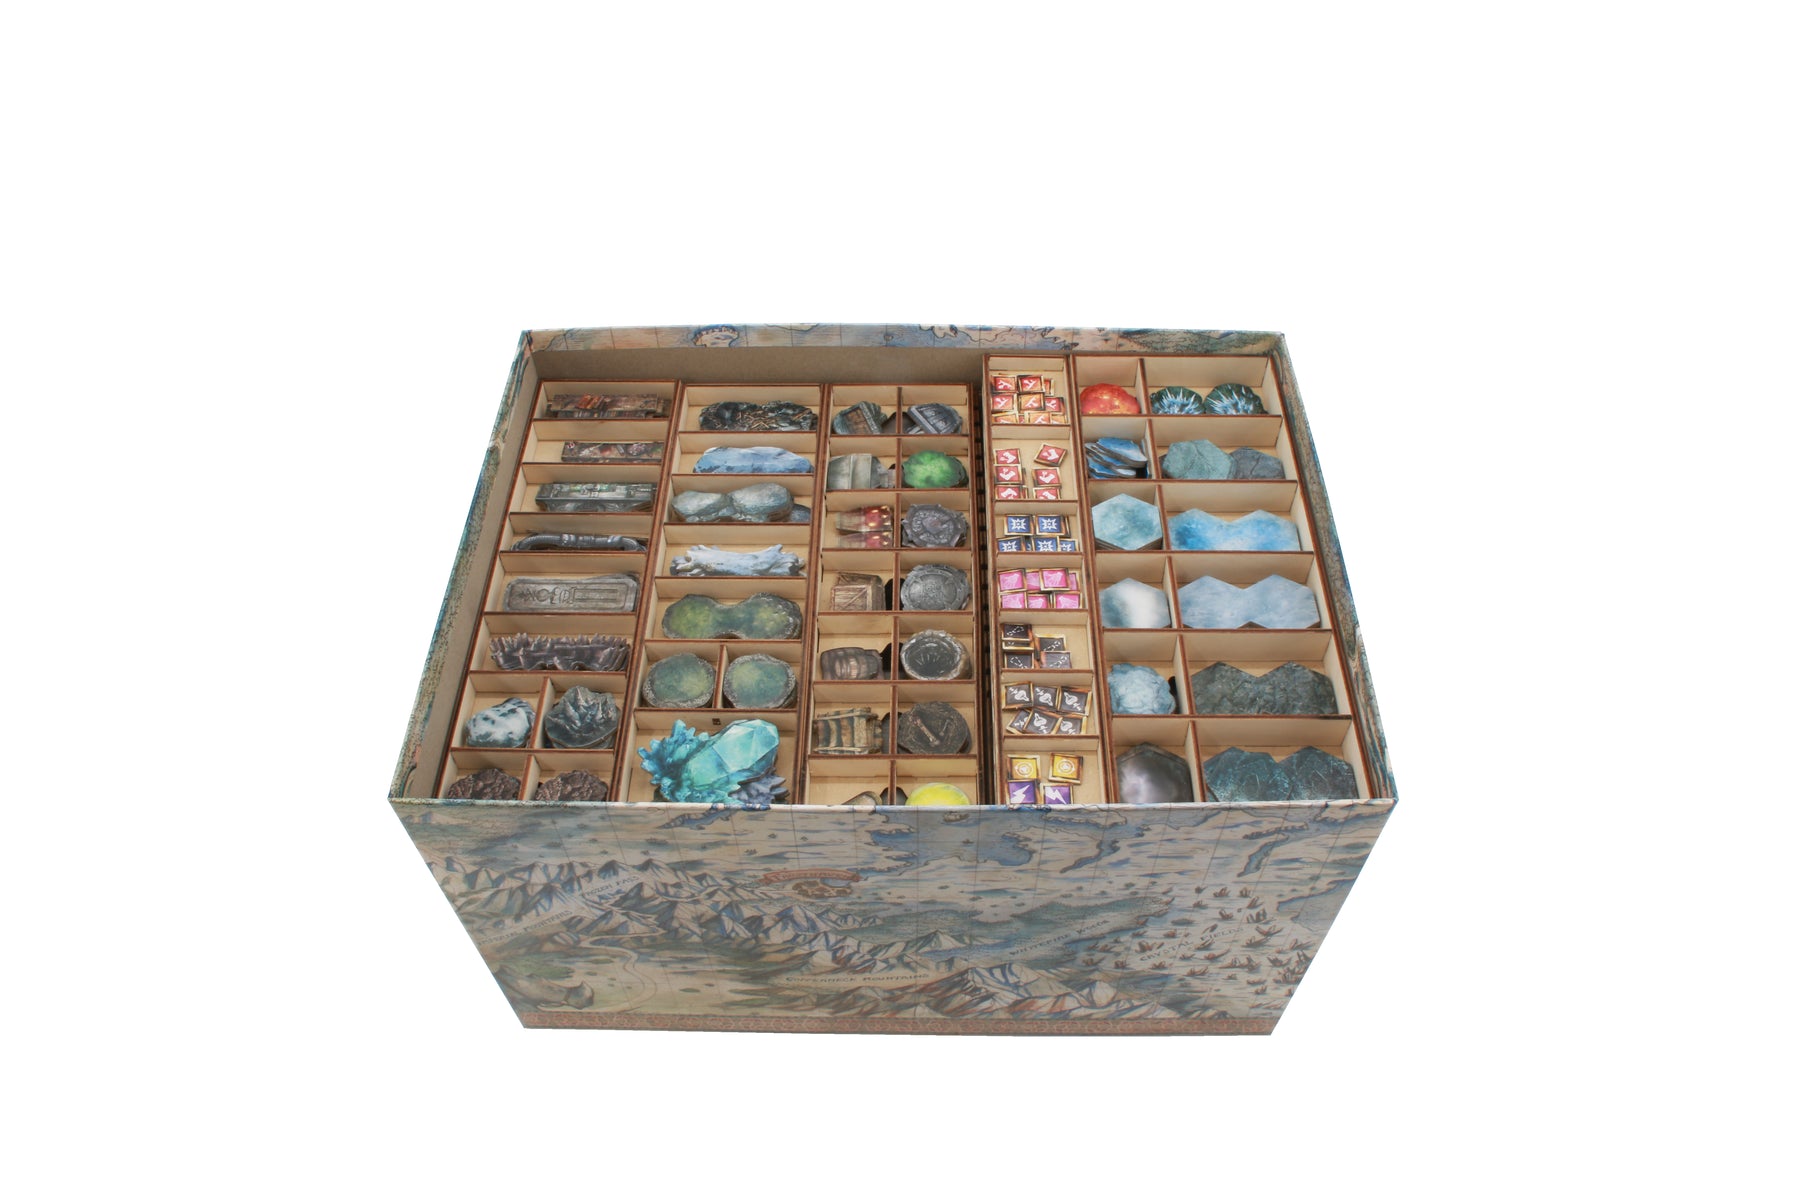 Frosthaven Board Game All-in-One Storage Box Made of Wood –